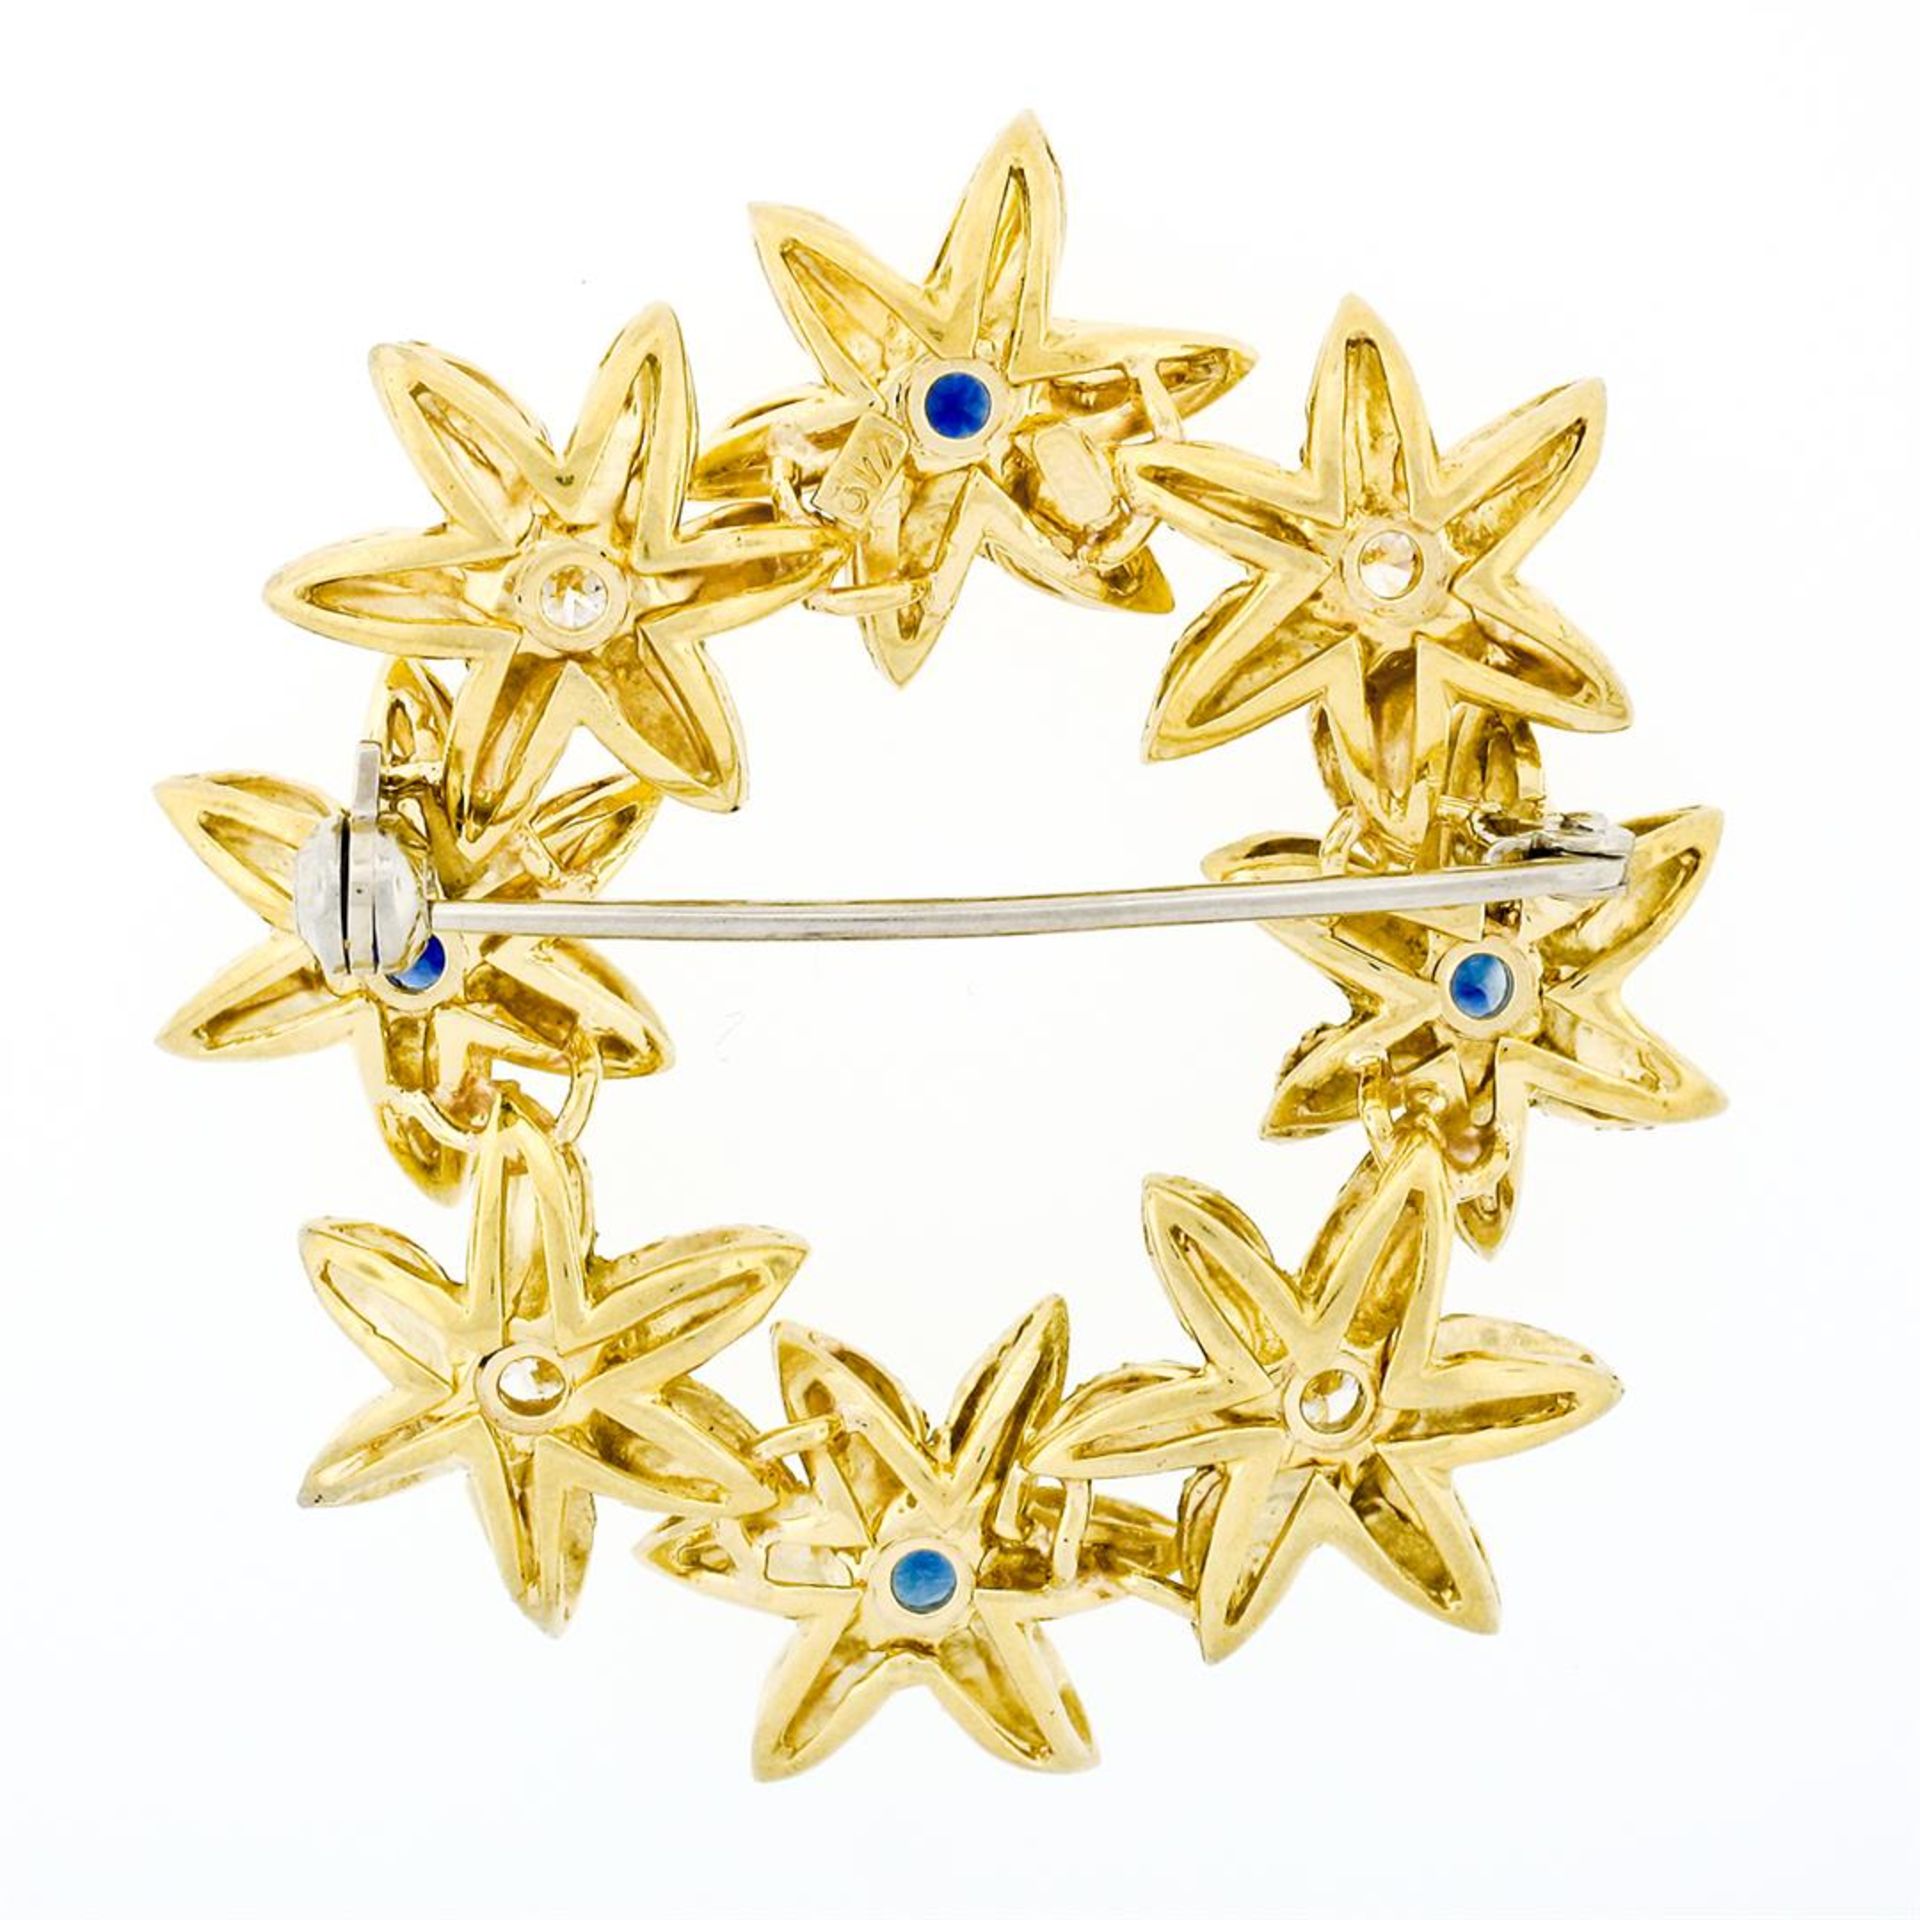 Vintage 18k Gold 1.19ct Brilliant Sapphire & Diamond Etched Flower Wreath Brooch - Image 3 of 7